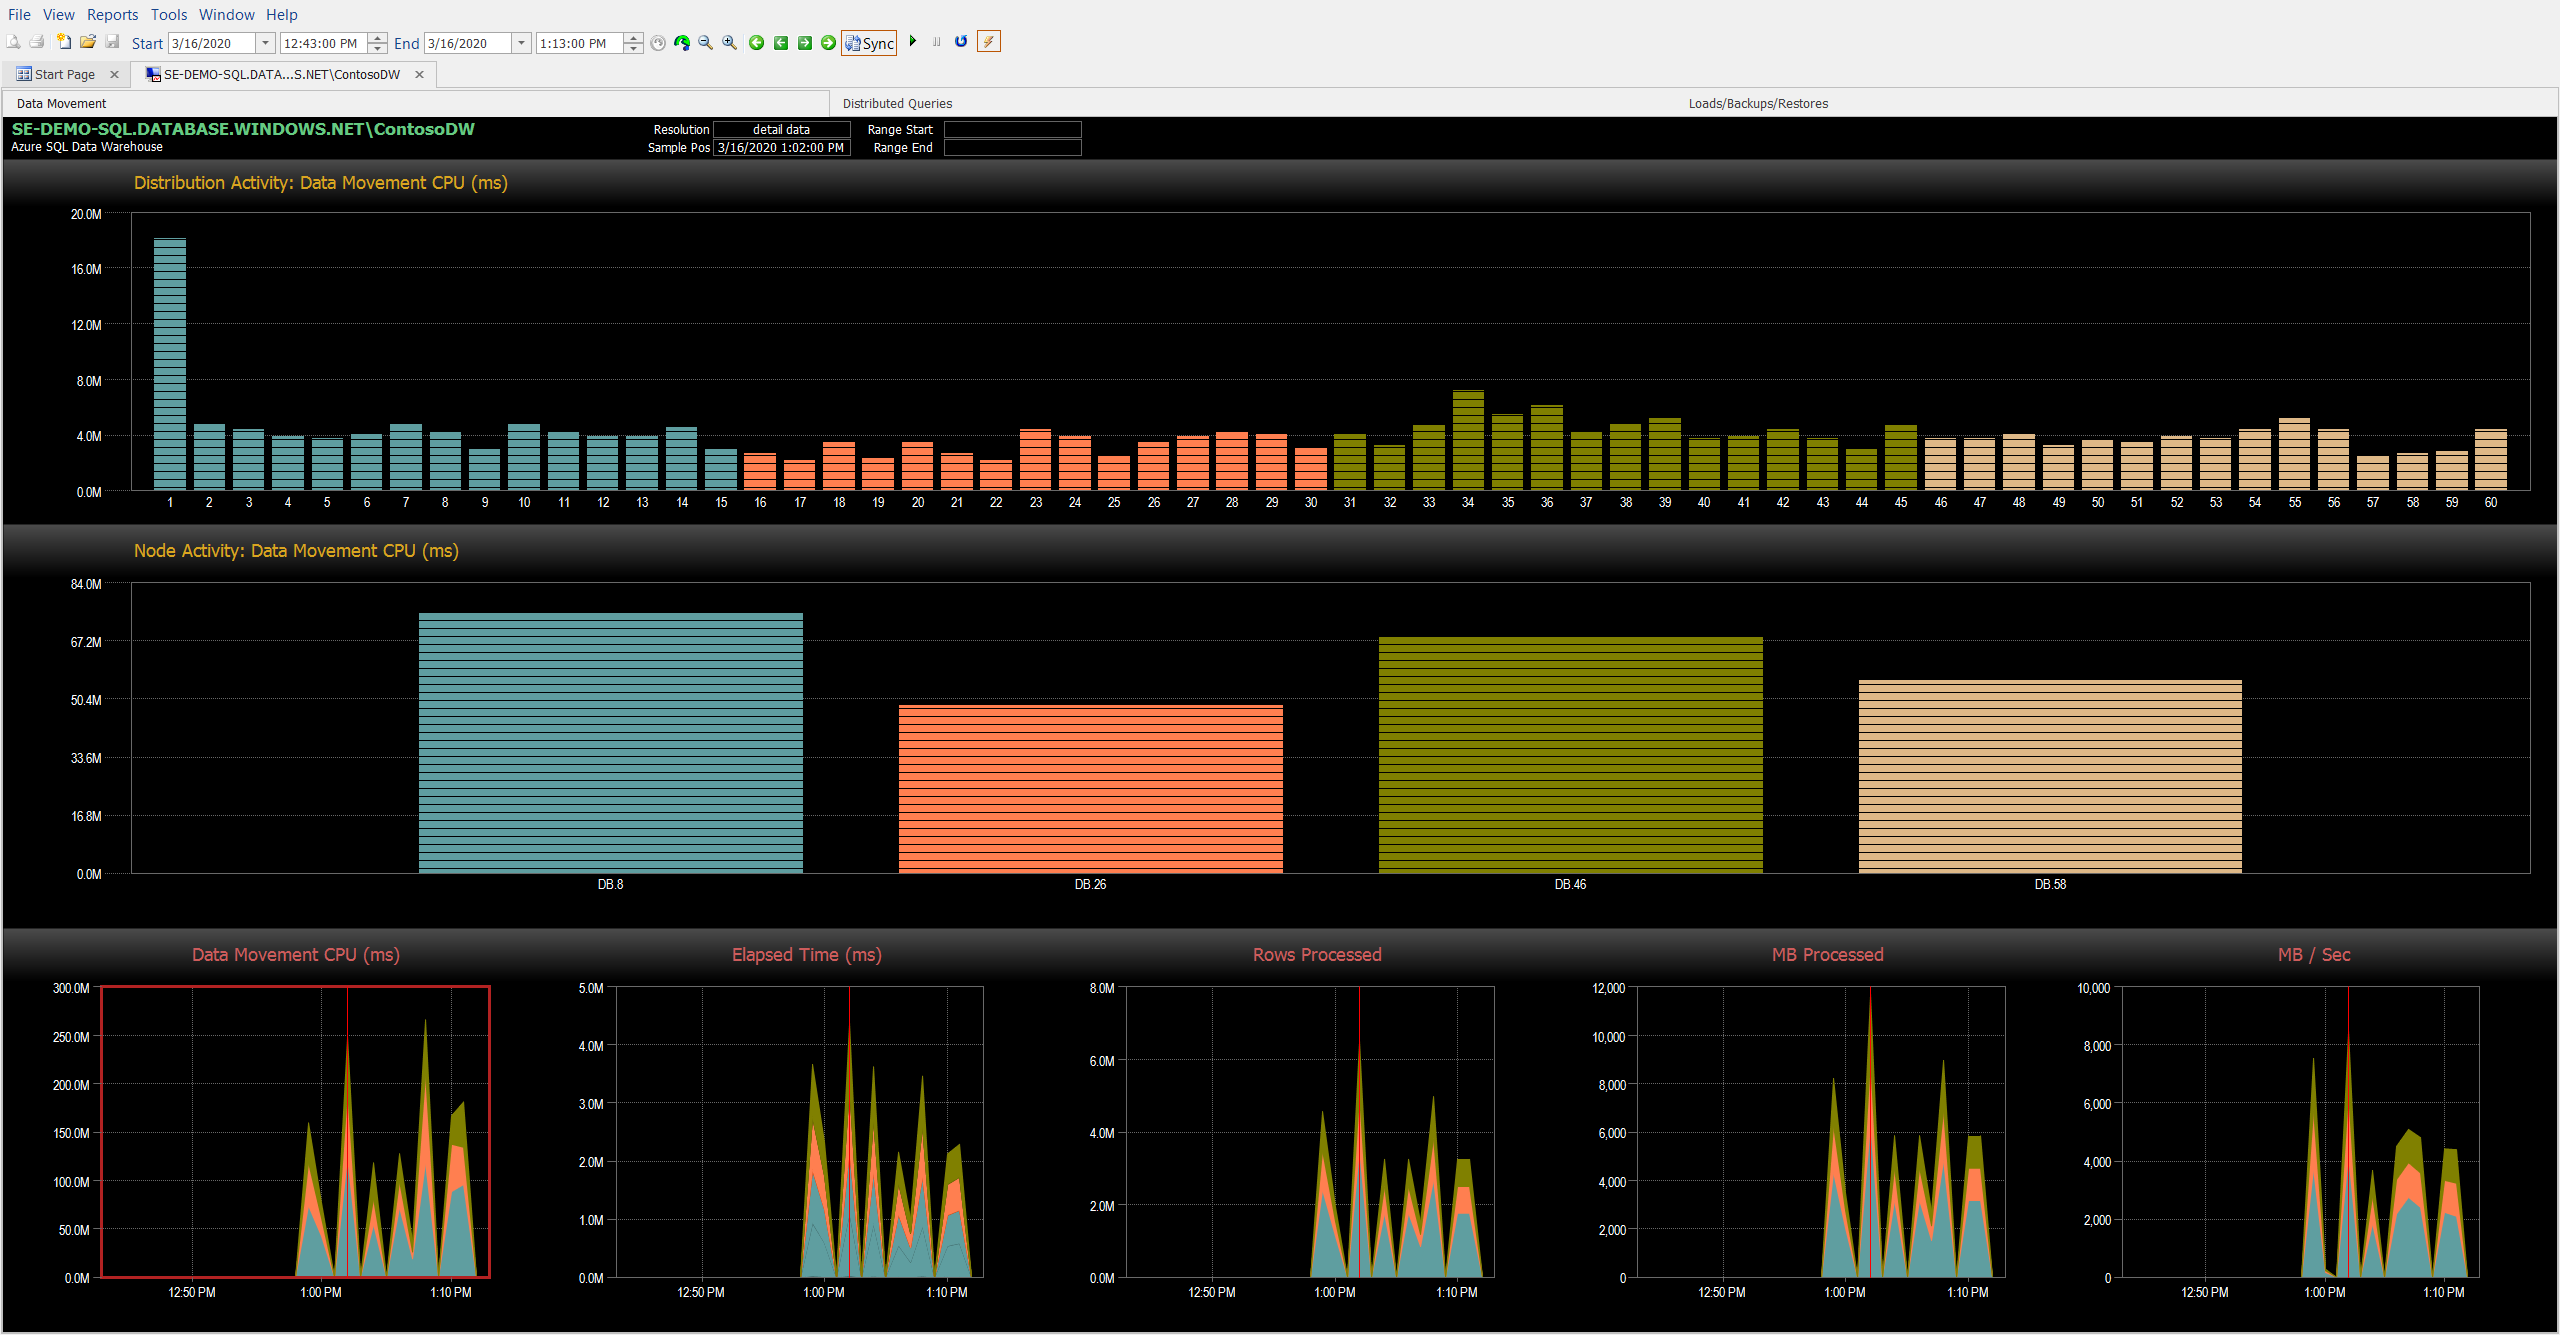 DW Sentry Data Movement Dashboard related graphs